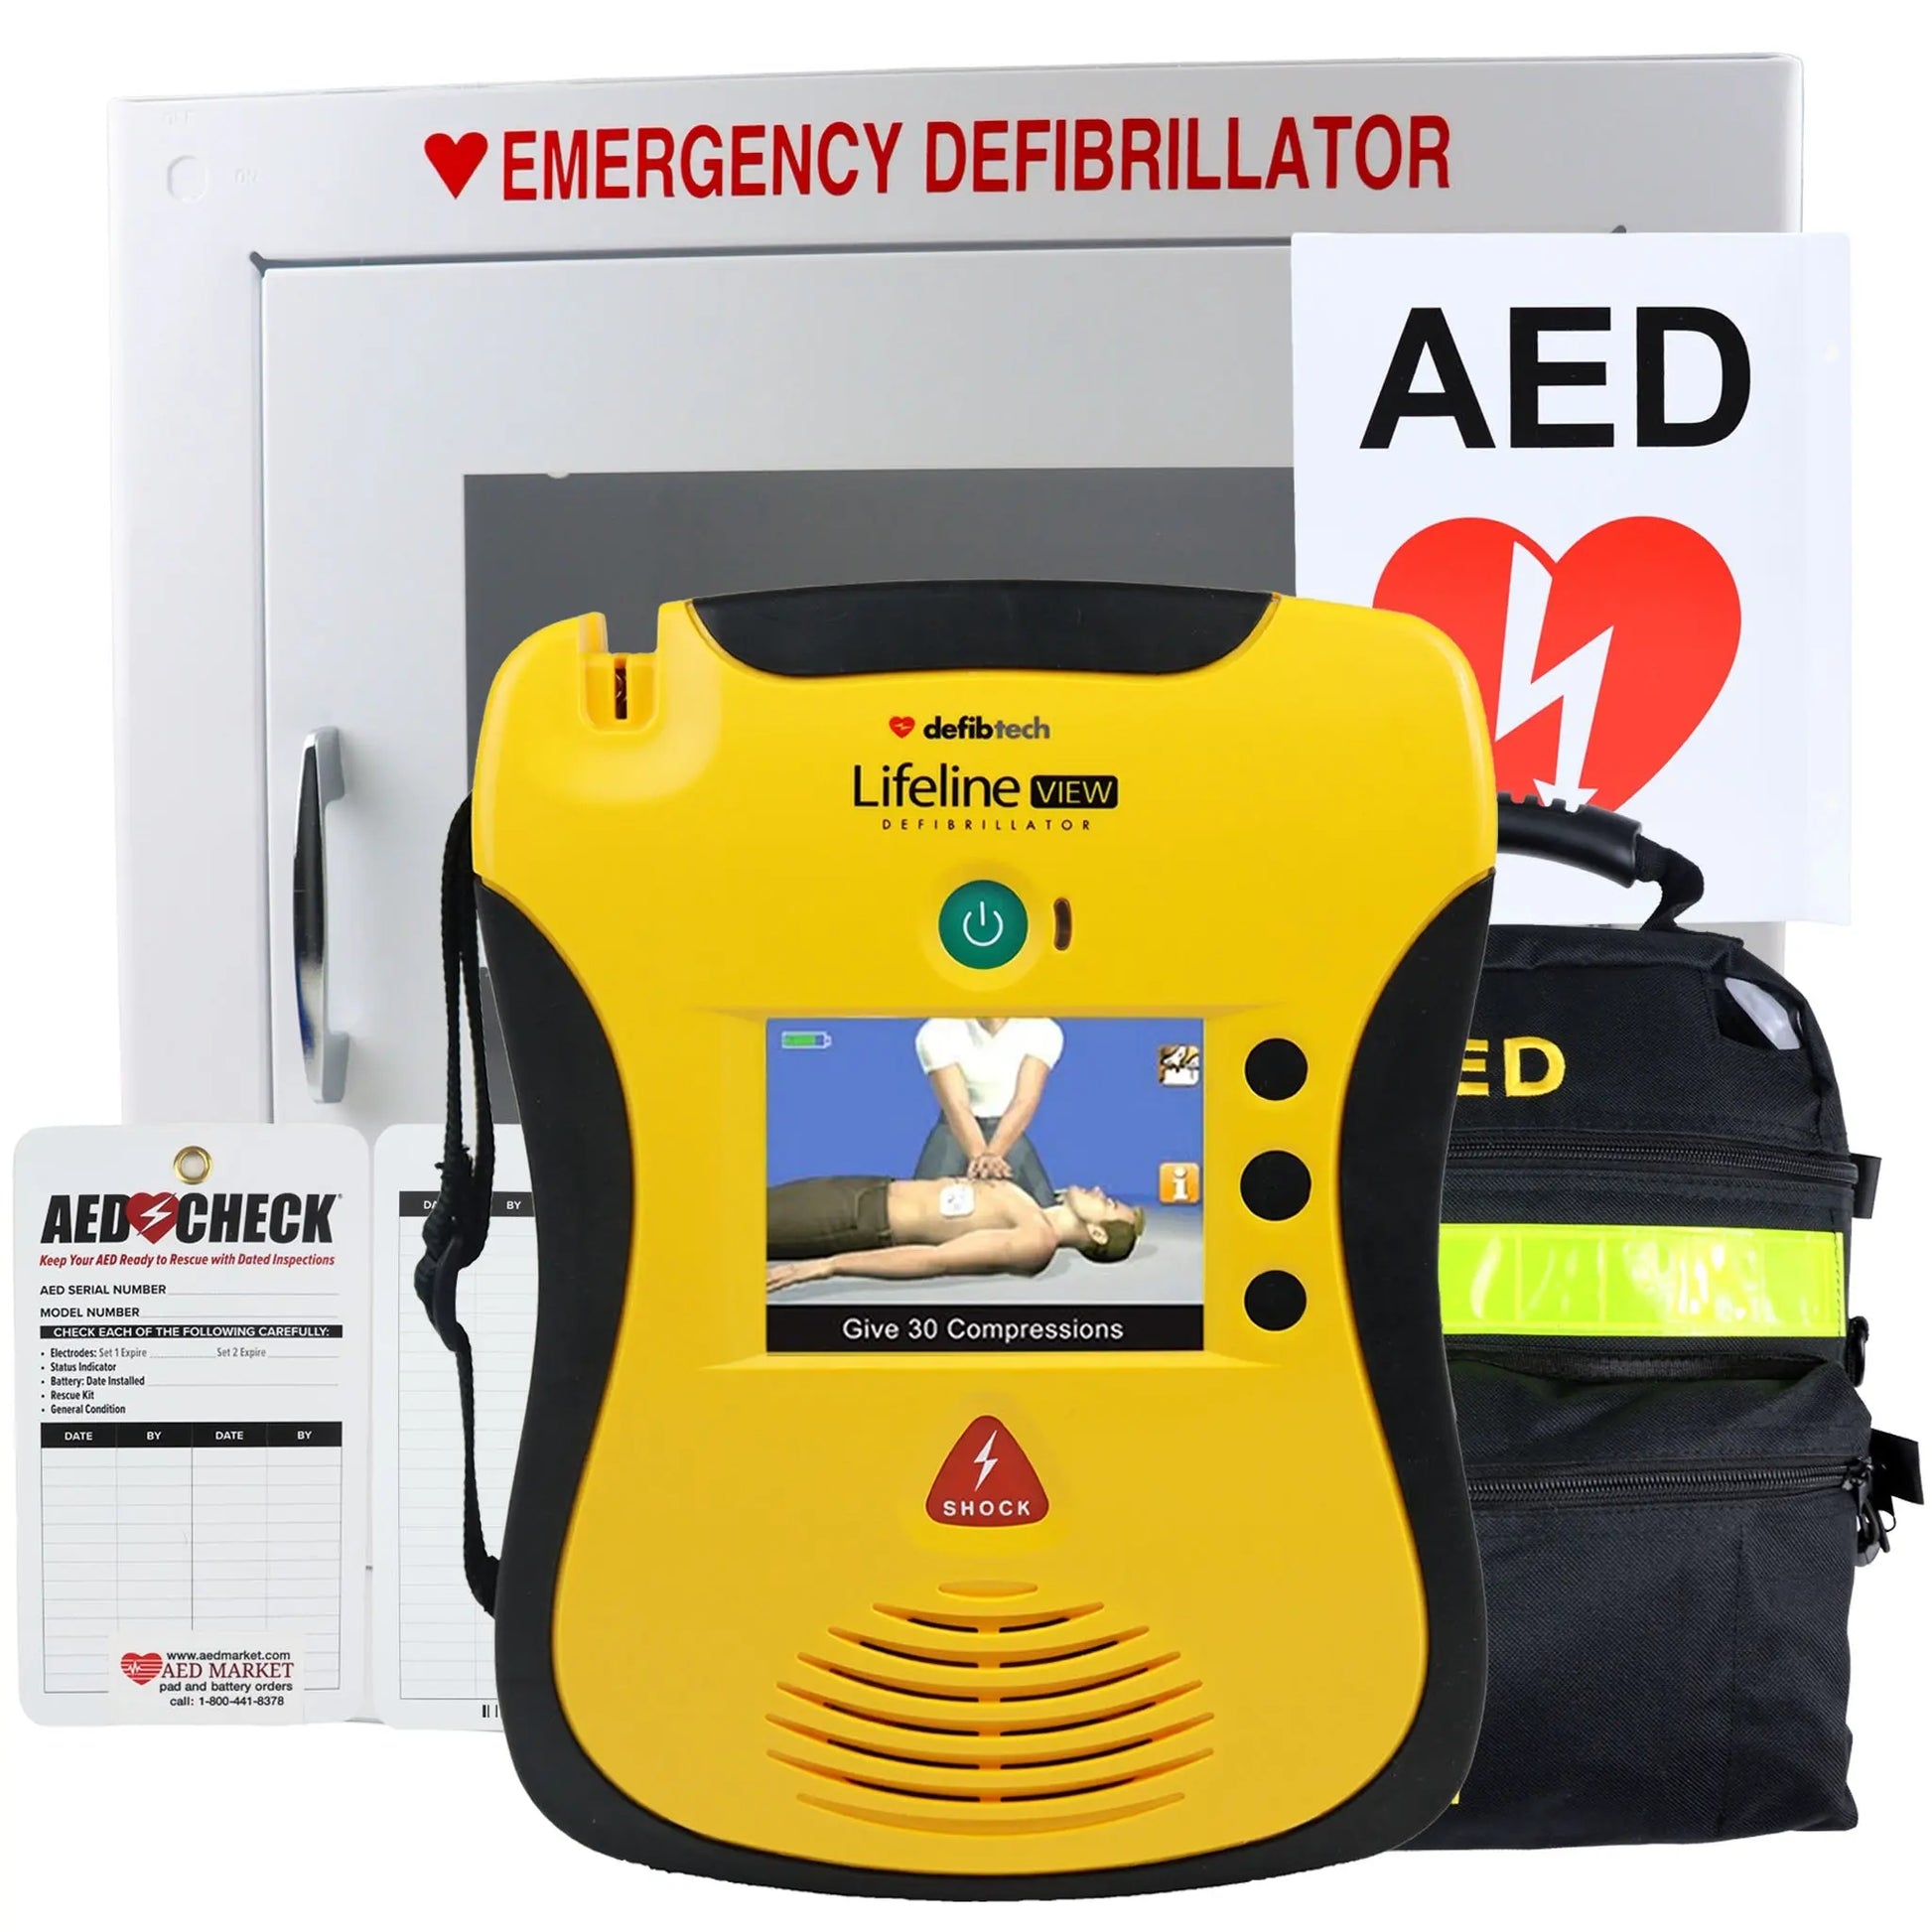 Defibtech Lifeline View AED Health Club Package - First Aid Market